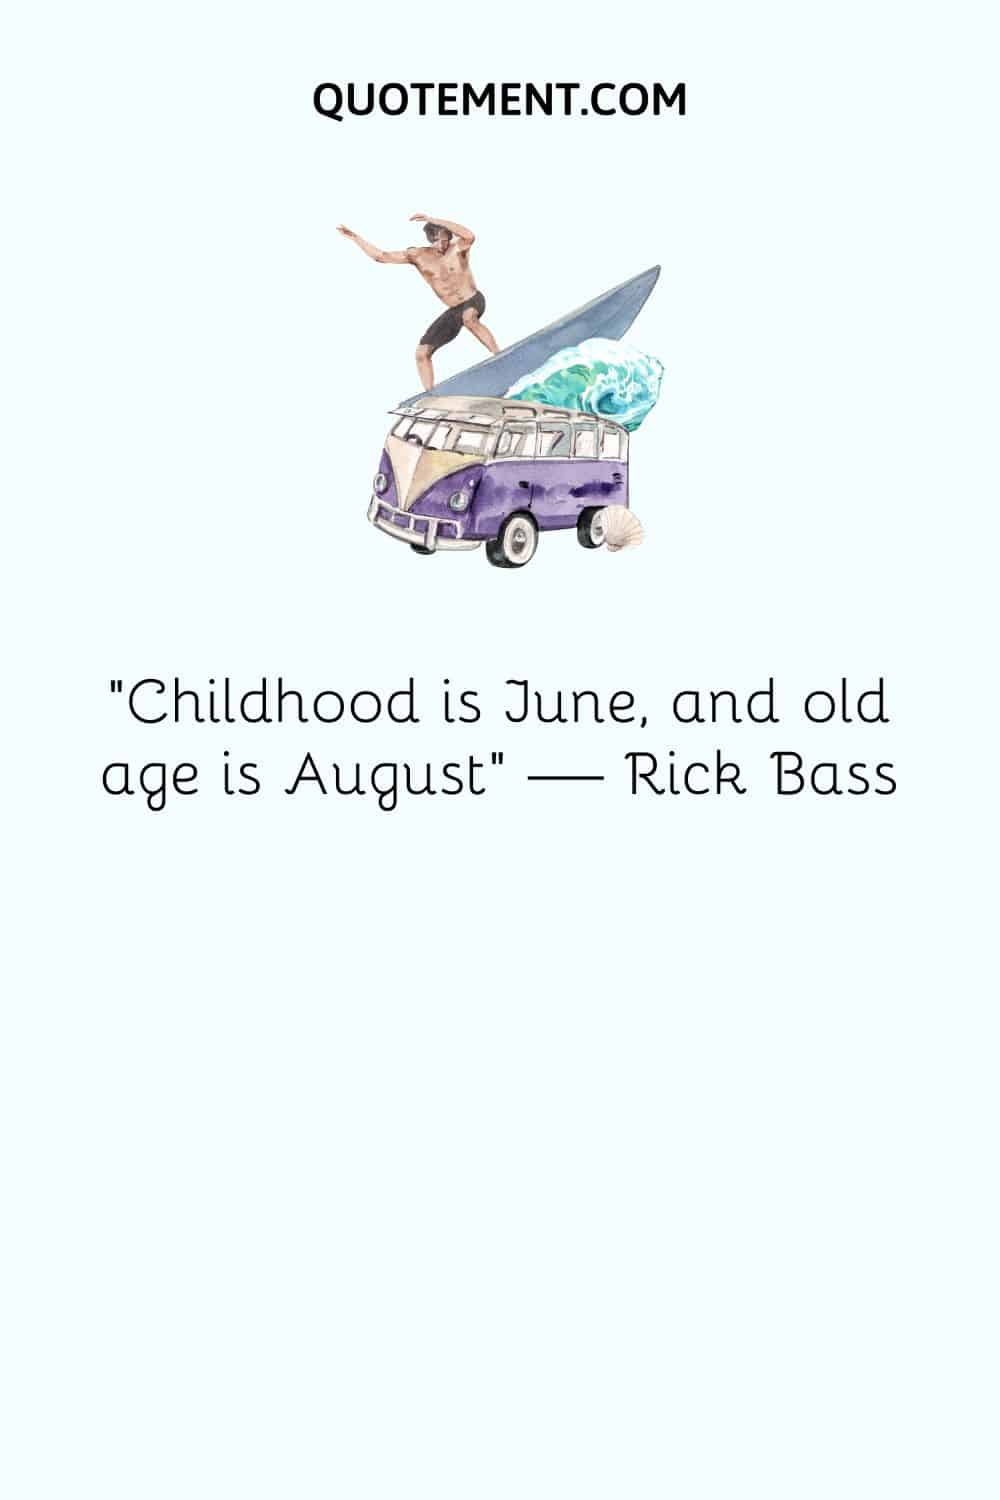 Childhood is June, and old age is August